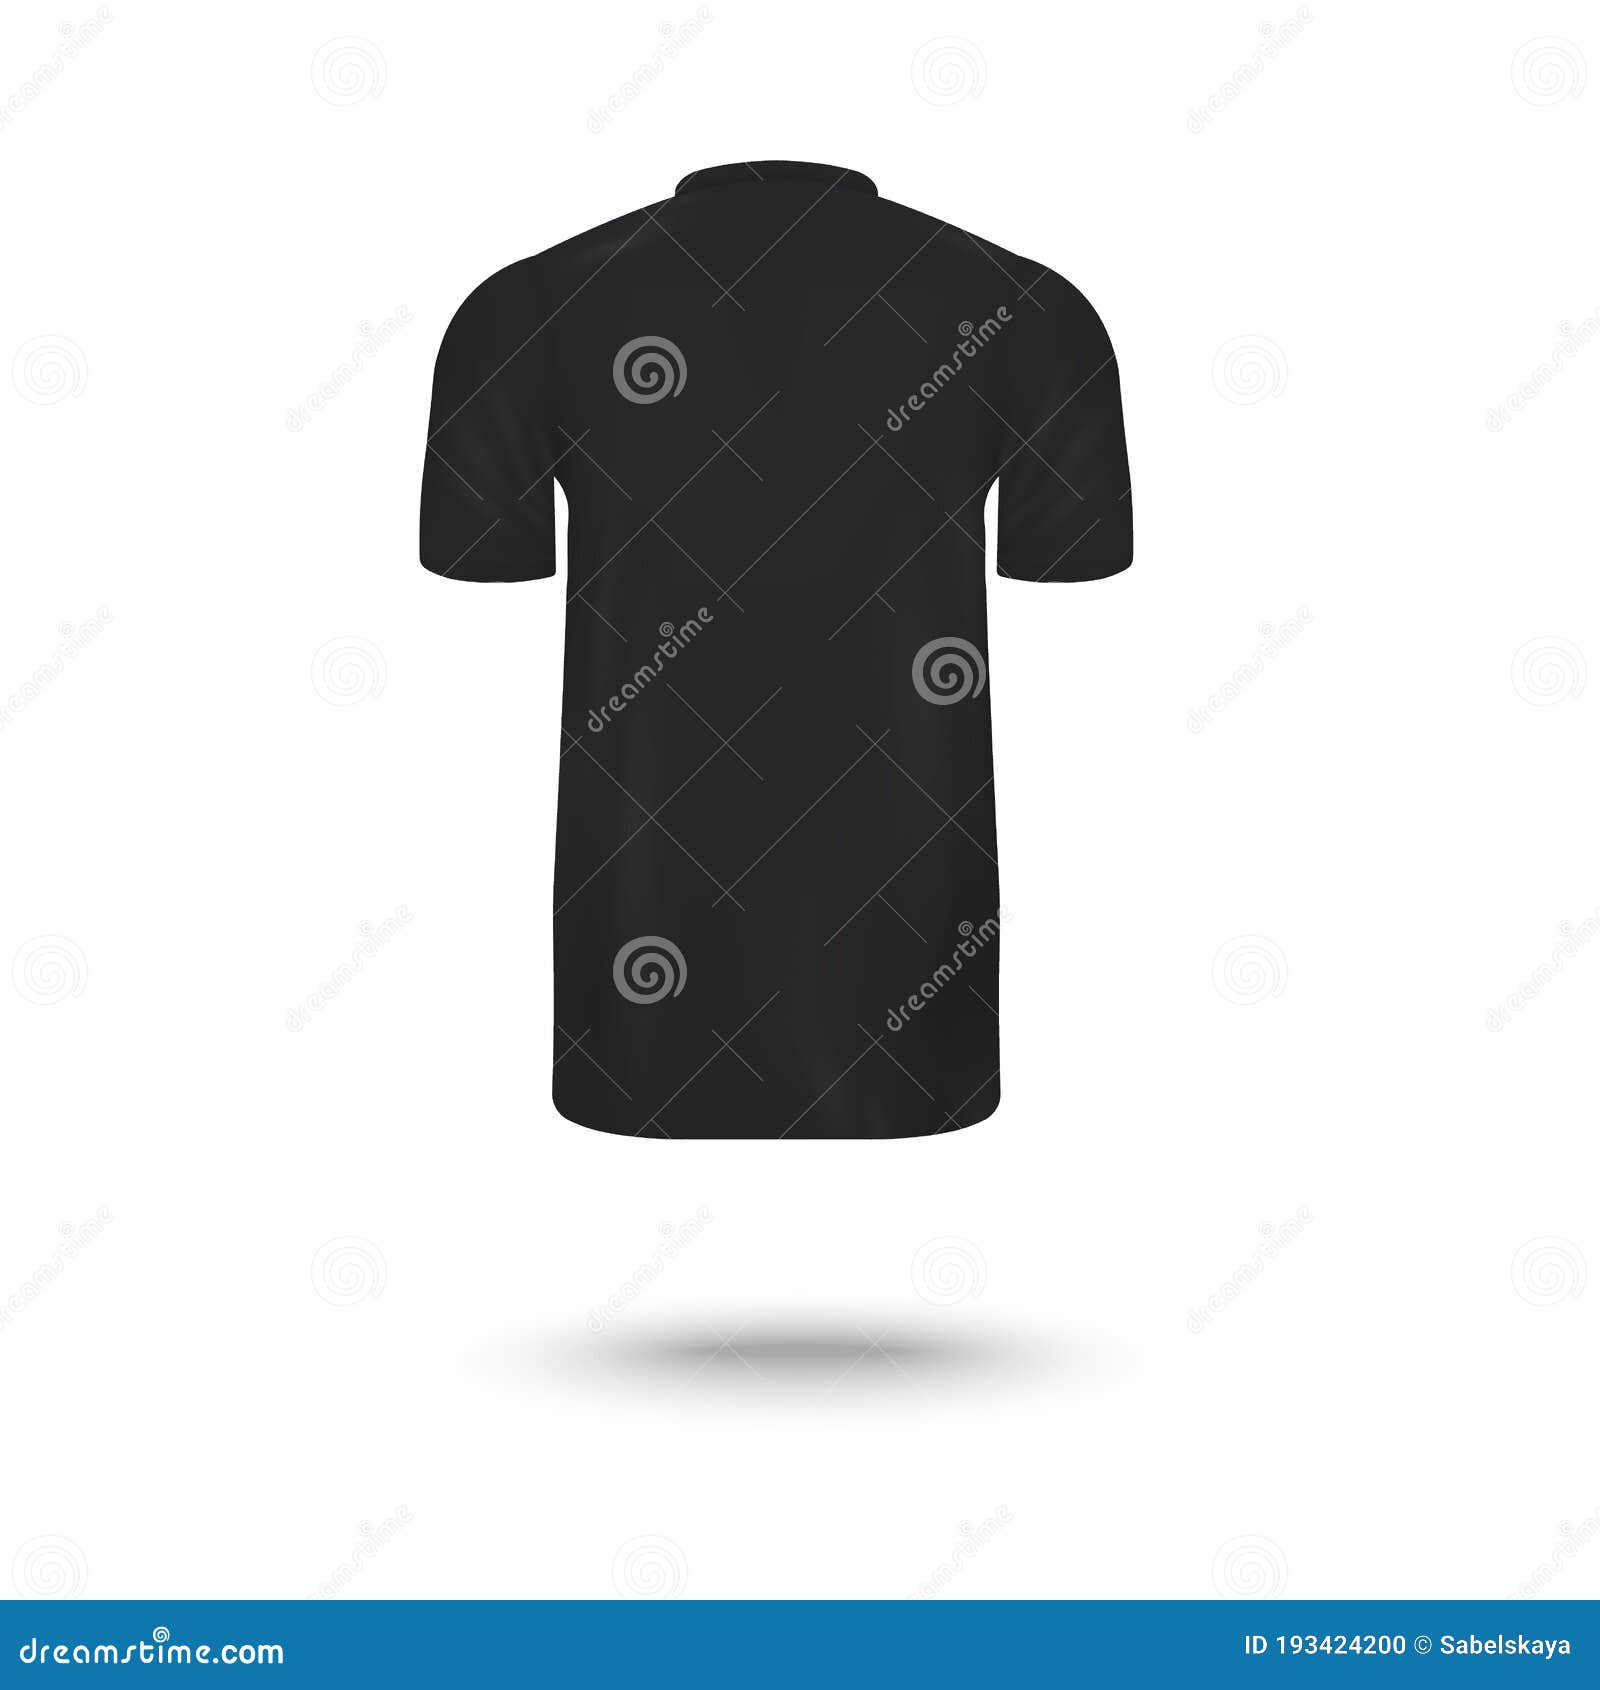 Download Black Men`s T-shirt Mockup Isolated On White Background ...